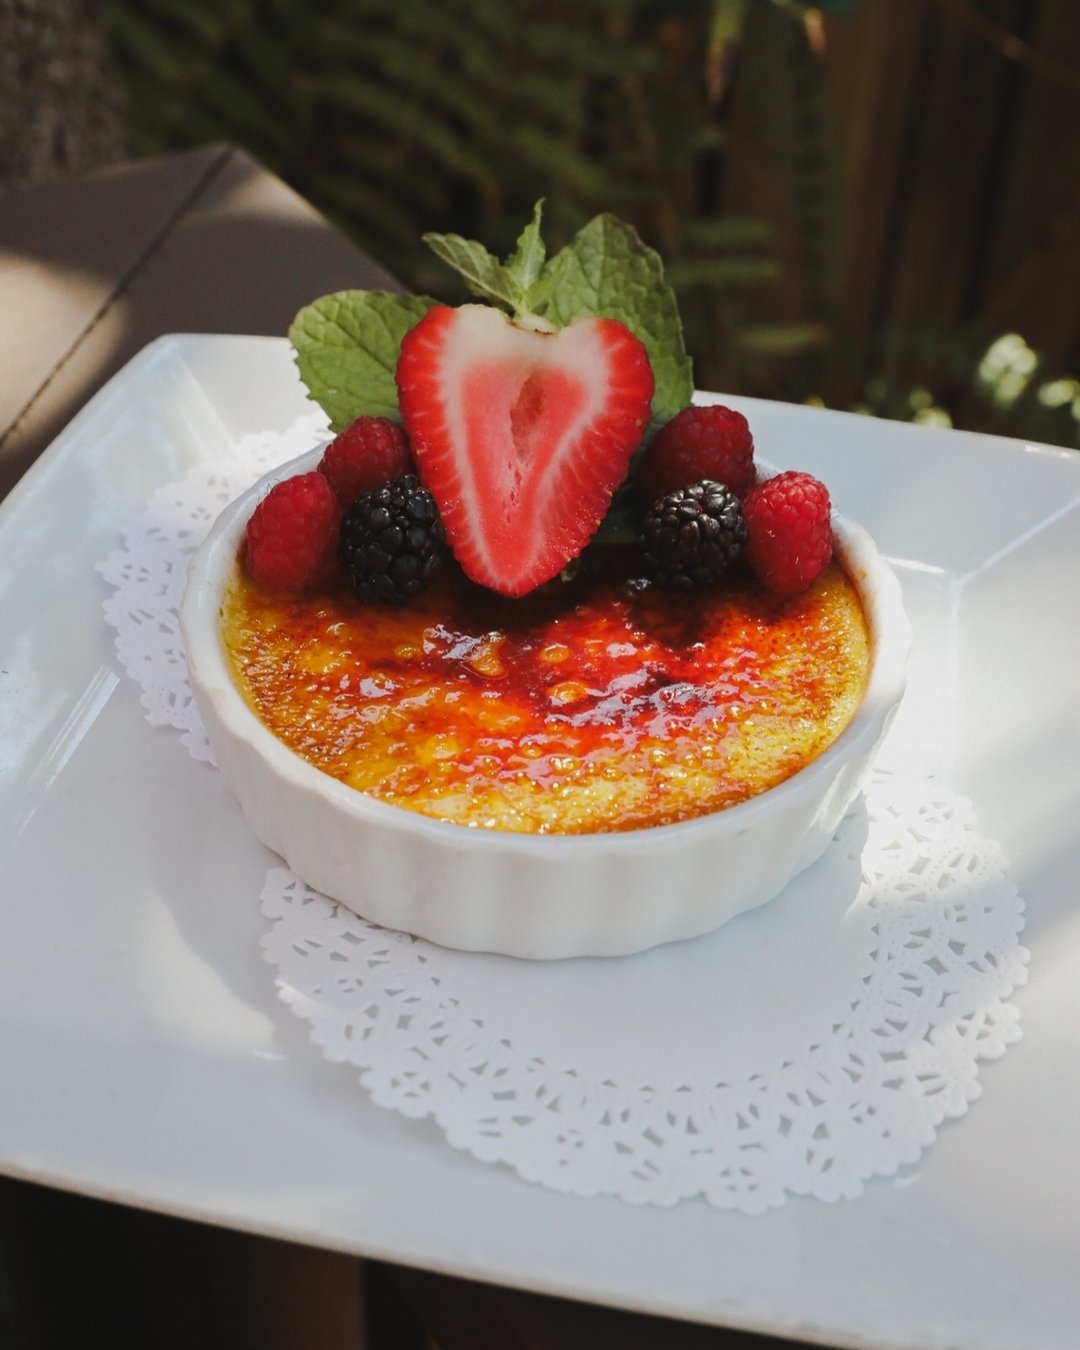 Satisfy your sweet tooth with our Vanilla Bean Creme Br&ucirc;l&eacute;e🍓

The soft, rich custard topped with caramelized sugar and fresh berries will leave you wanting more 😍